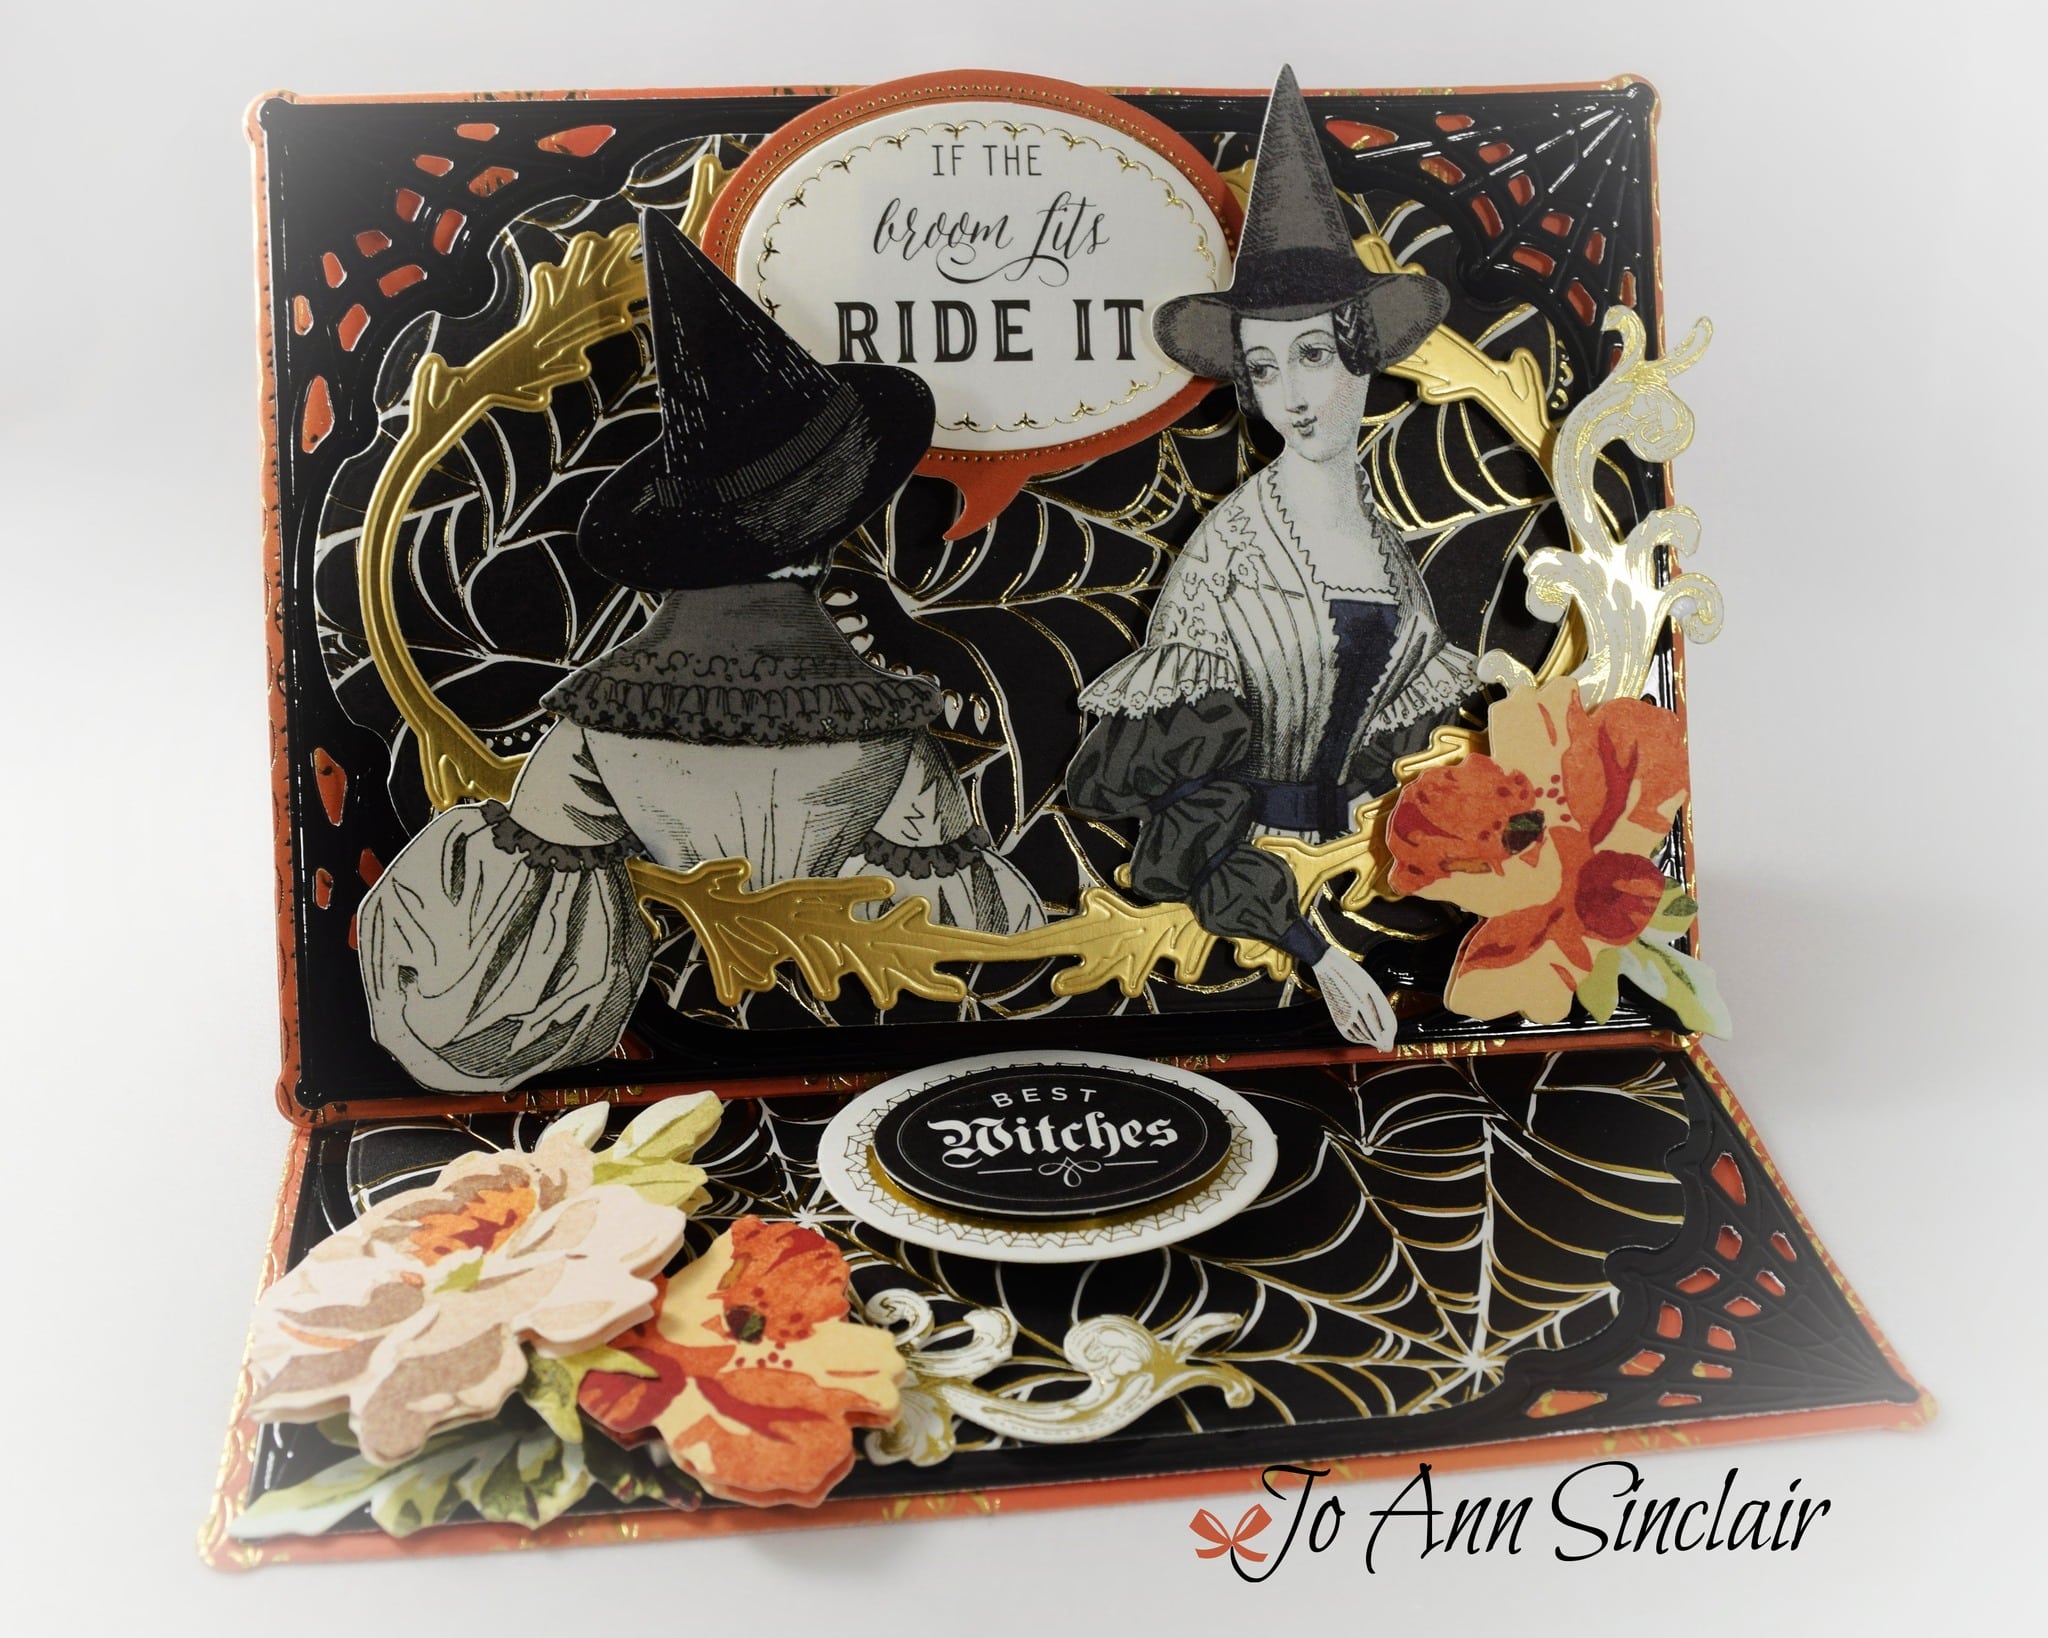 A pop up card with two witches and flowers.